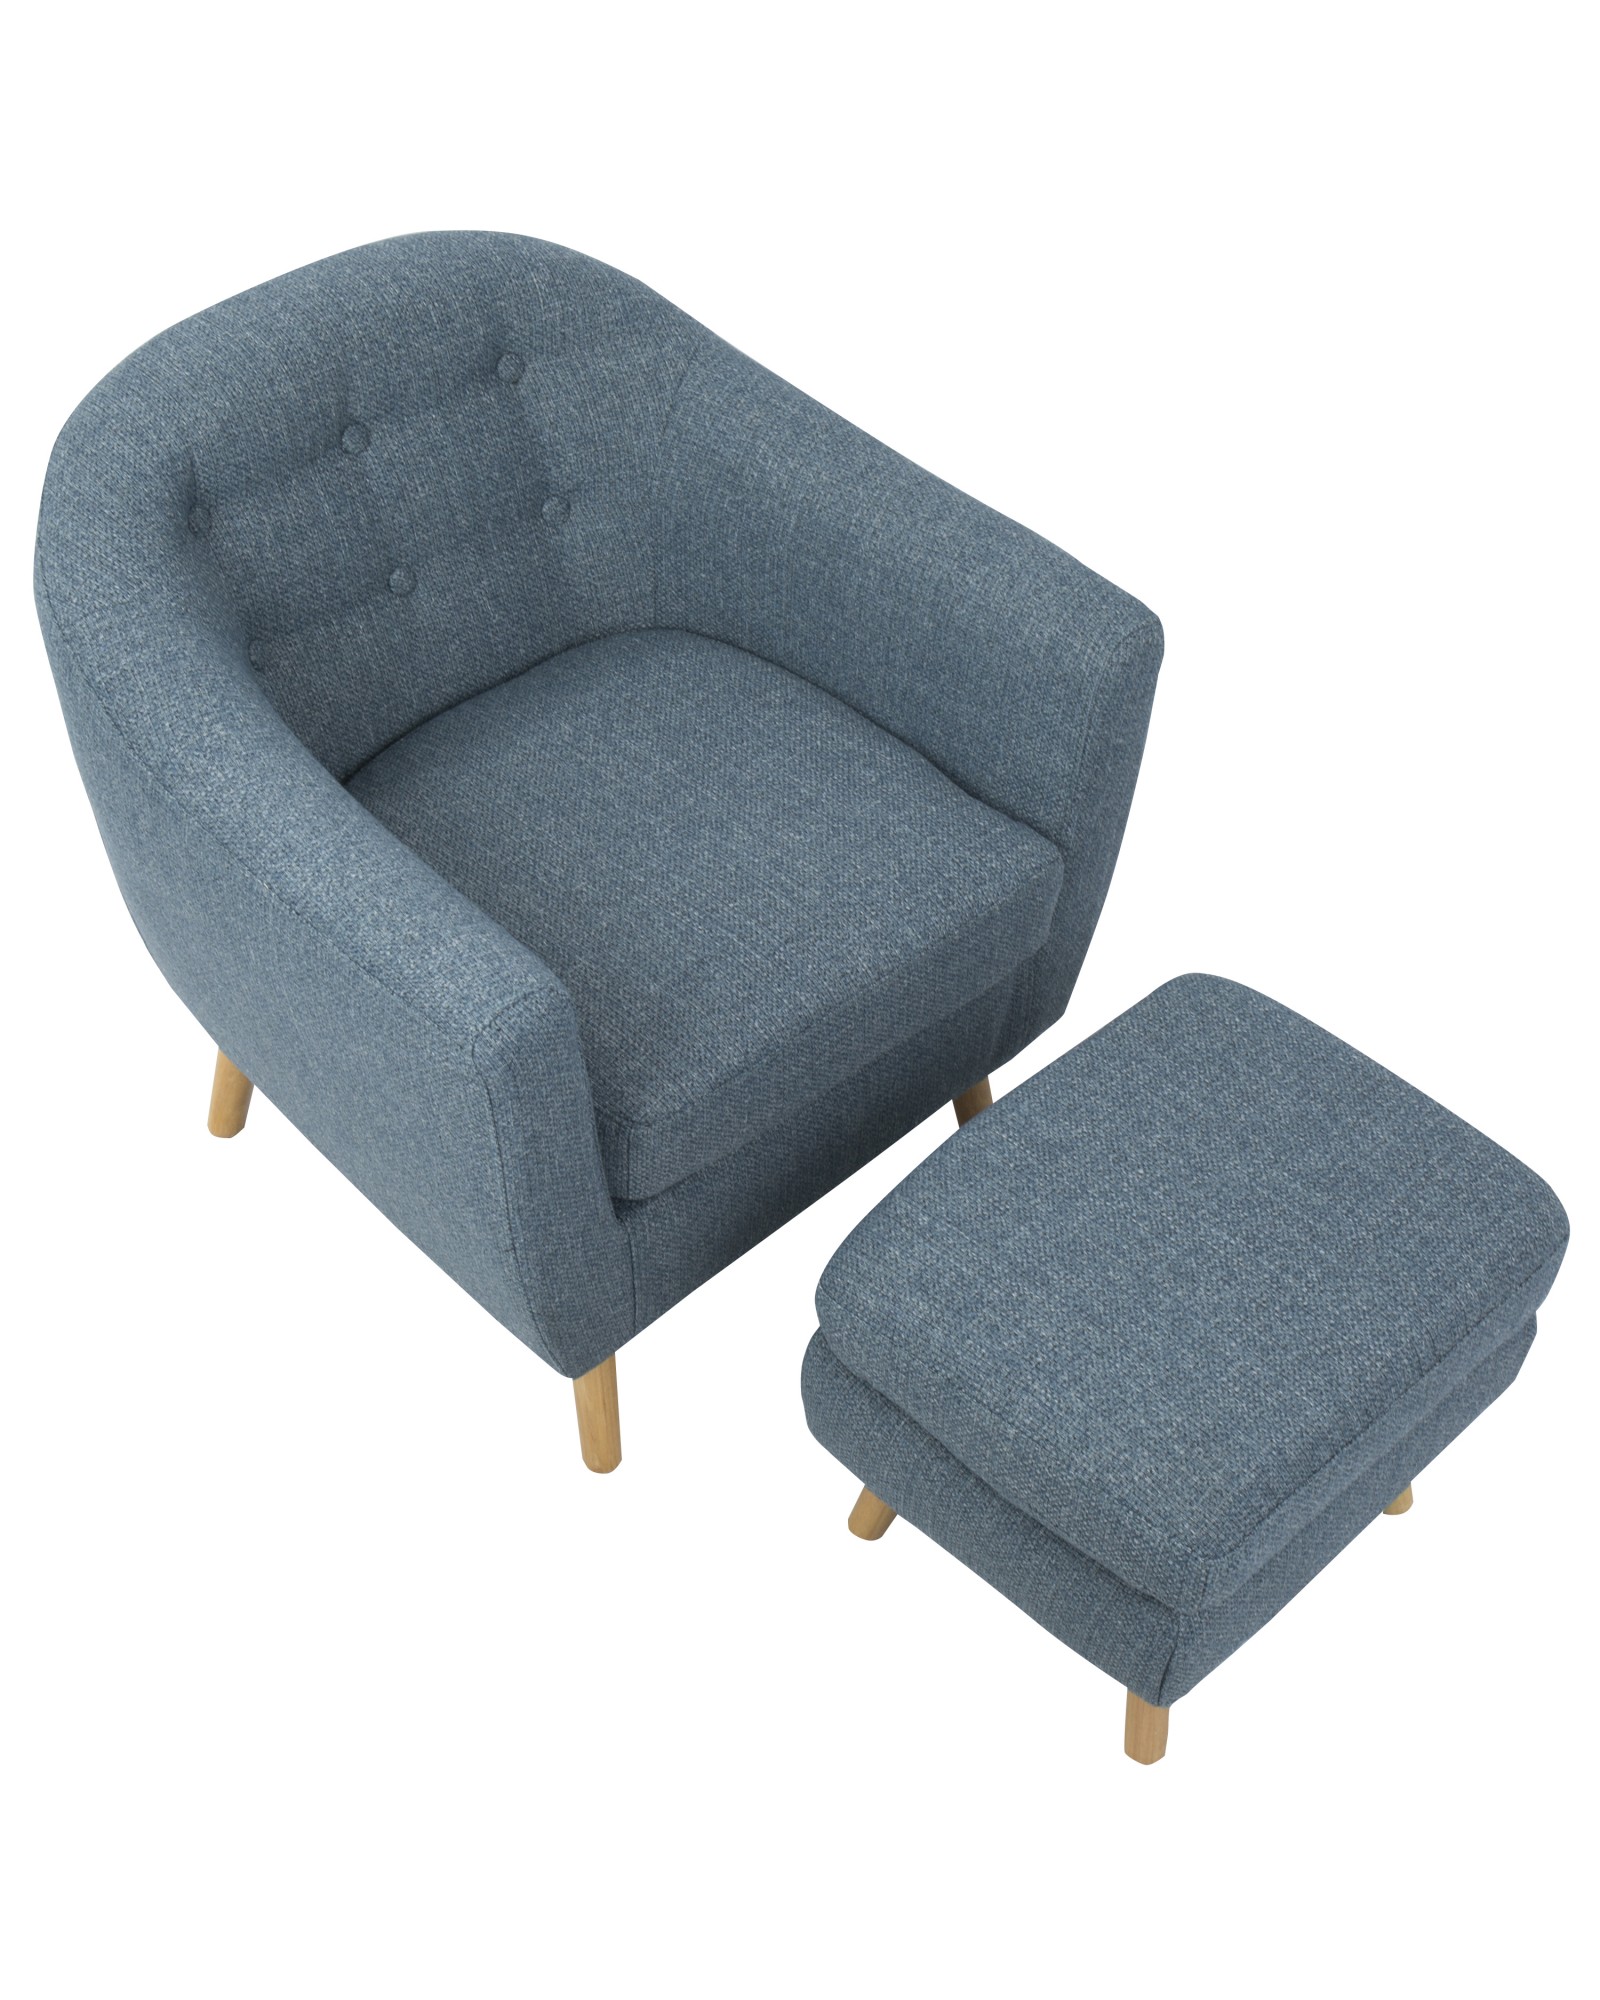 Rockwell Mid-Century Modern Accent Chair and Ottoman in Blue Noise Fabric